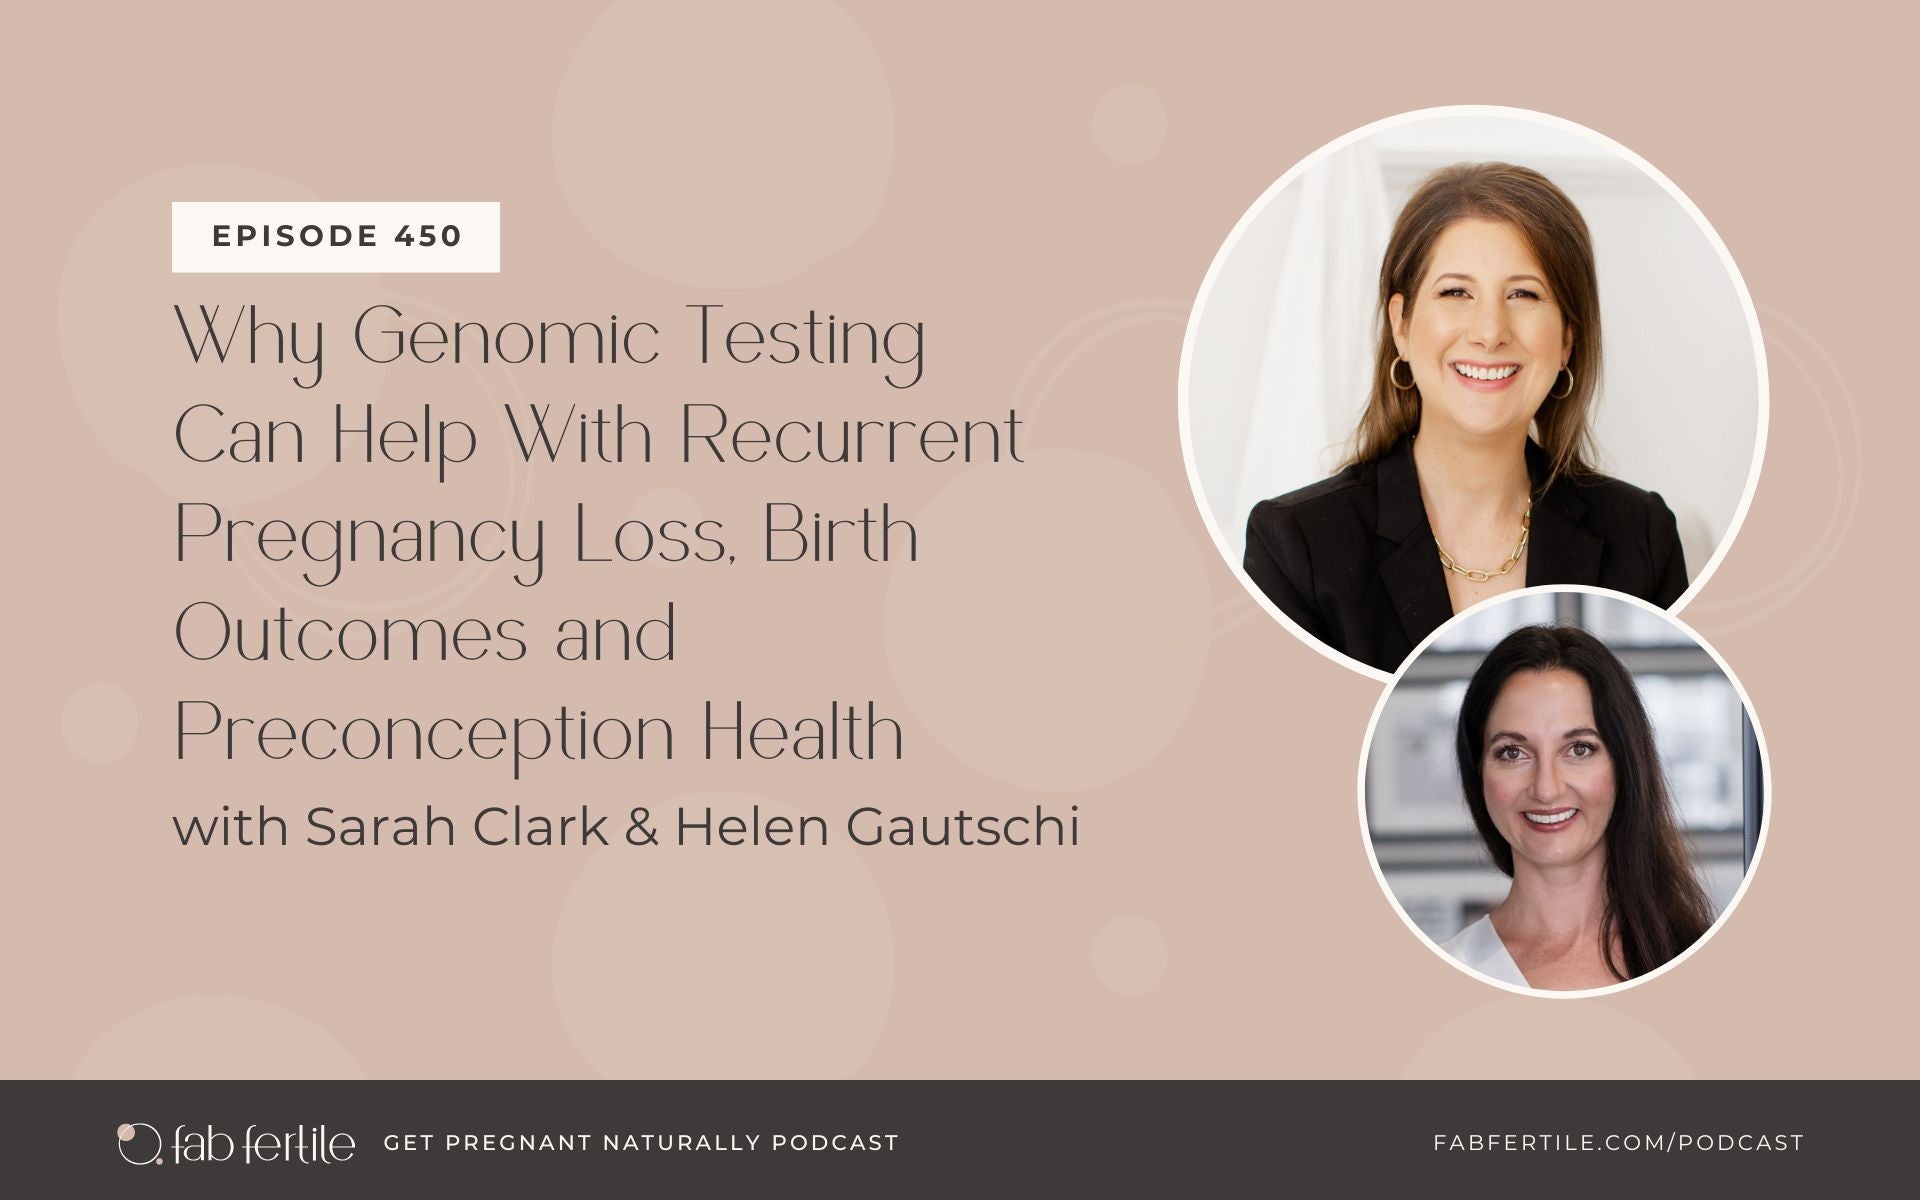 Why Genomic Testing Can Help With Recurrent Pregnancy Loss, Birth Outcomes and Preconception Health